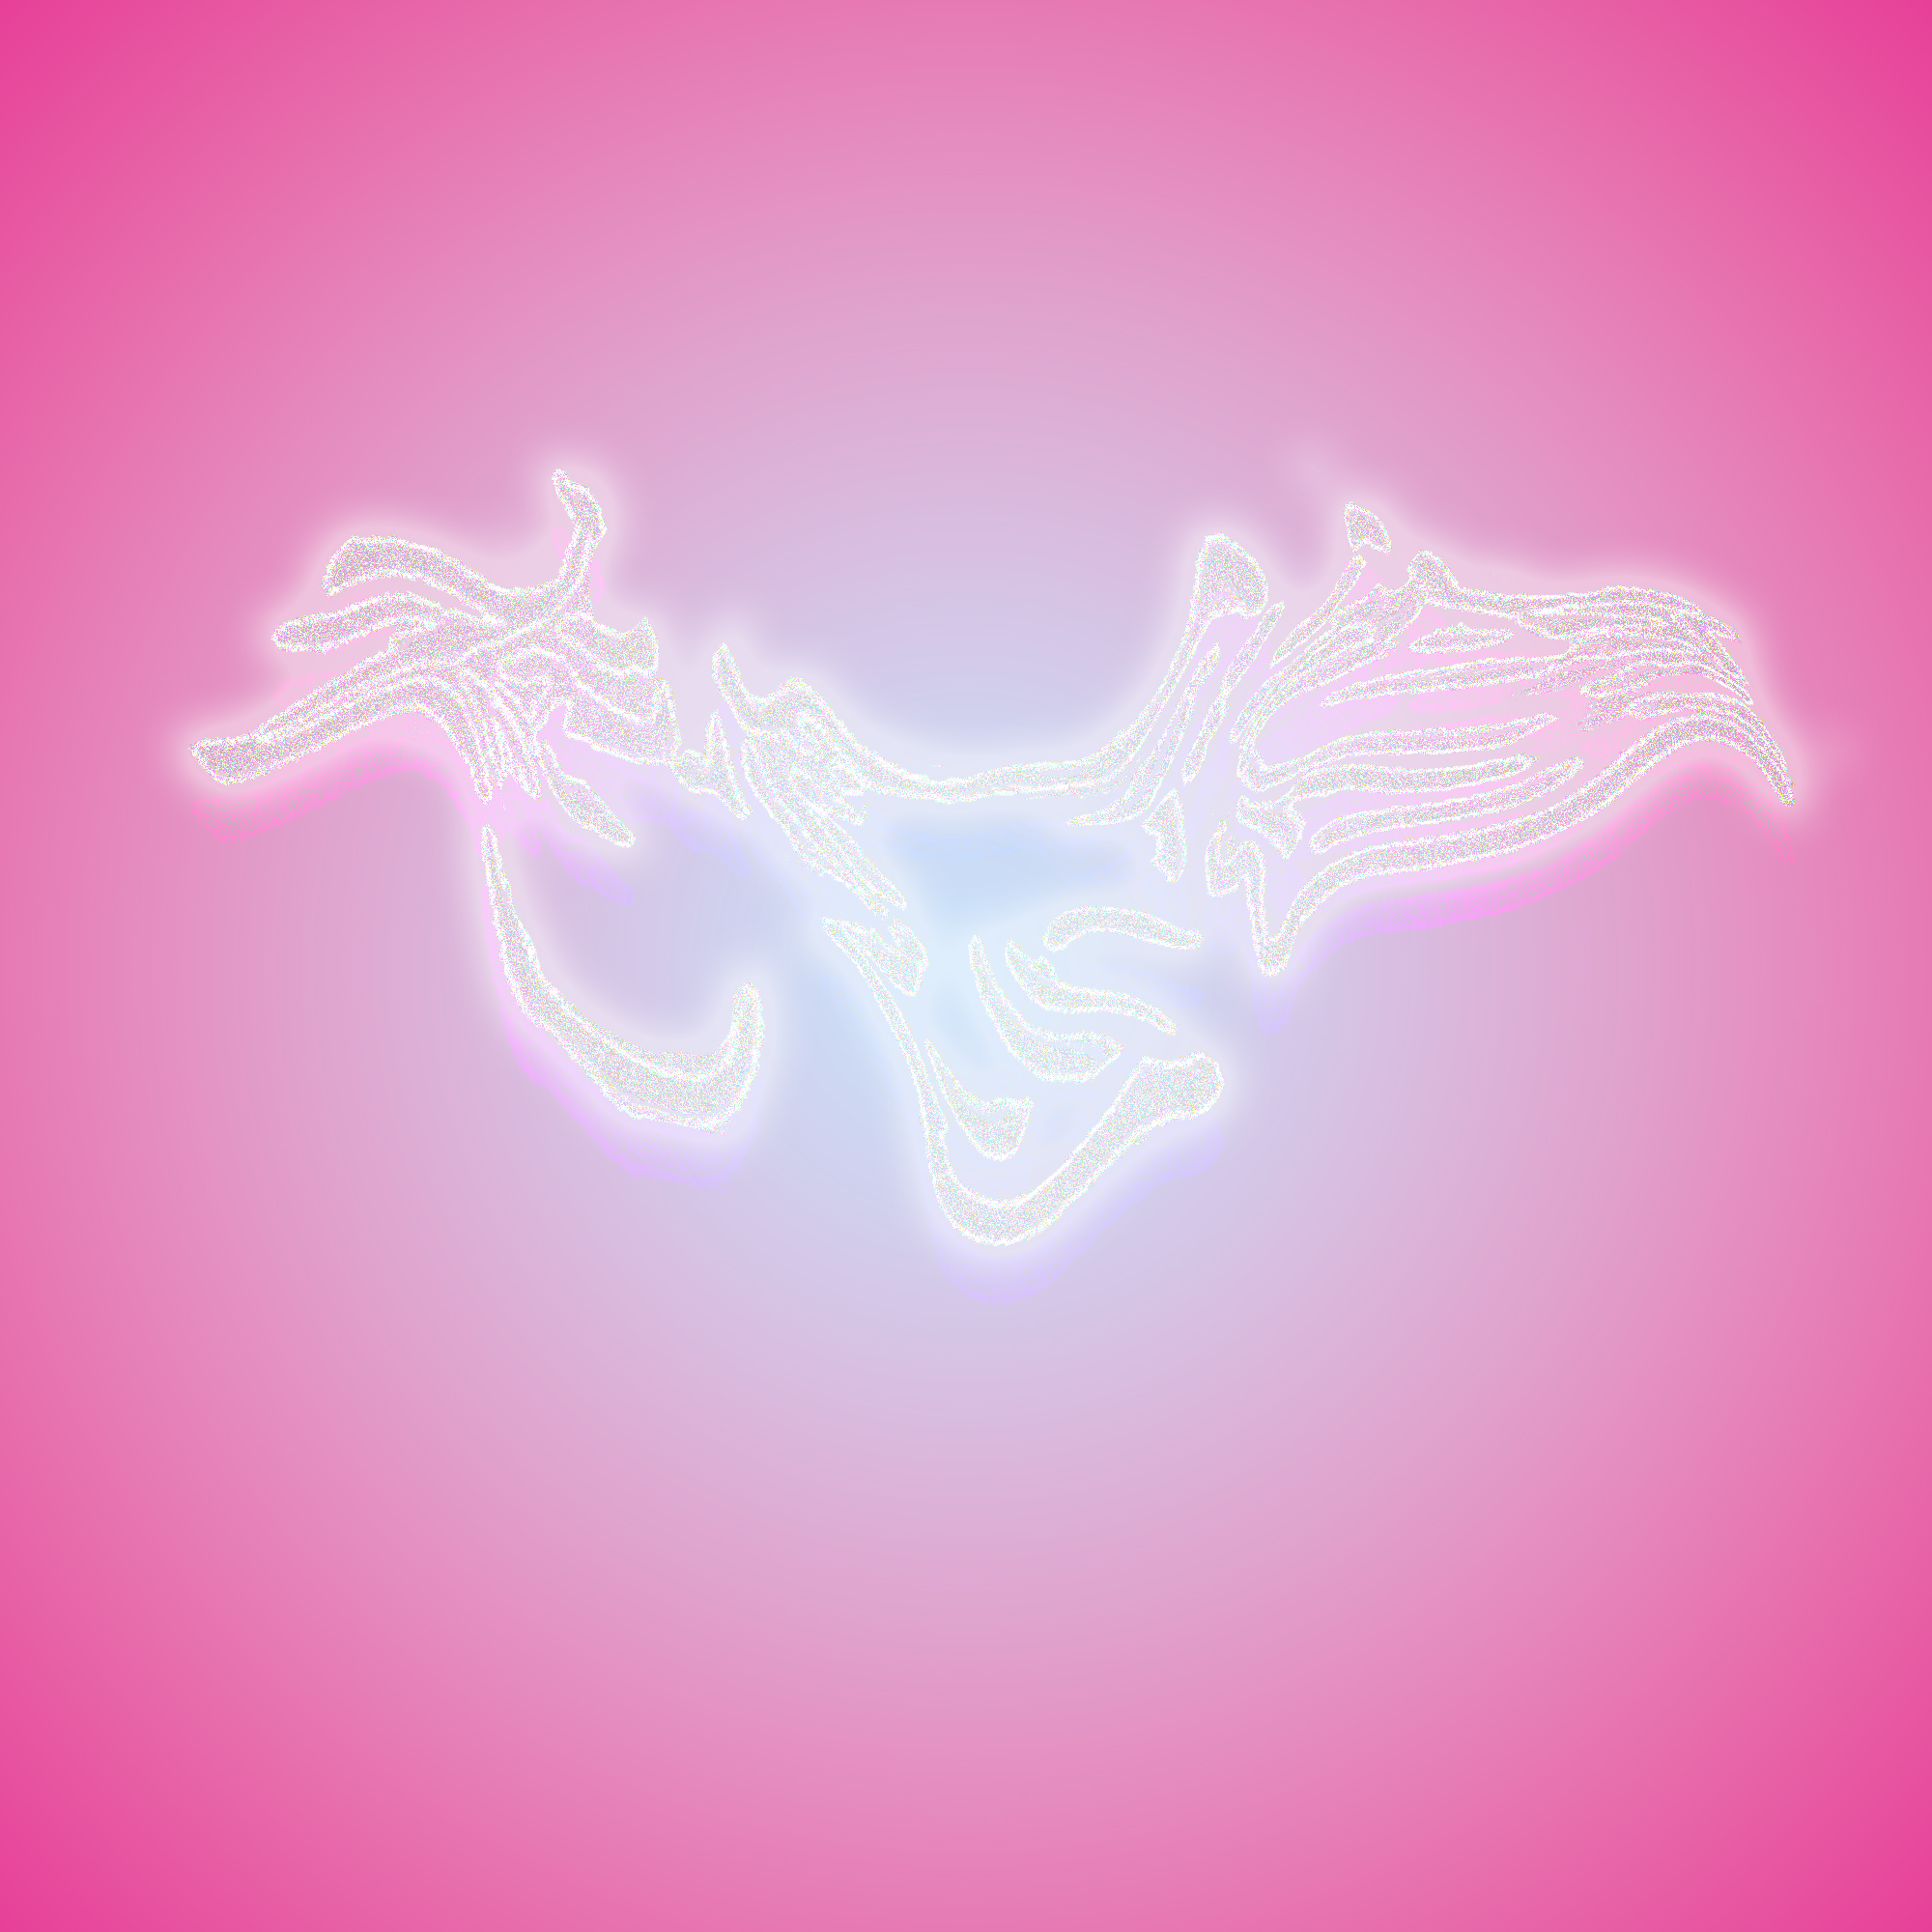 Glowing white text with the lyrics “在哪里” (which translates to “where” or literally “at what place?”) from Teresa Teng’s song 甜蜜蜜 (Sweet On You) on a gradient, glowing pink and blue background.